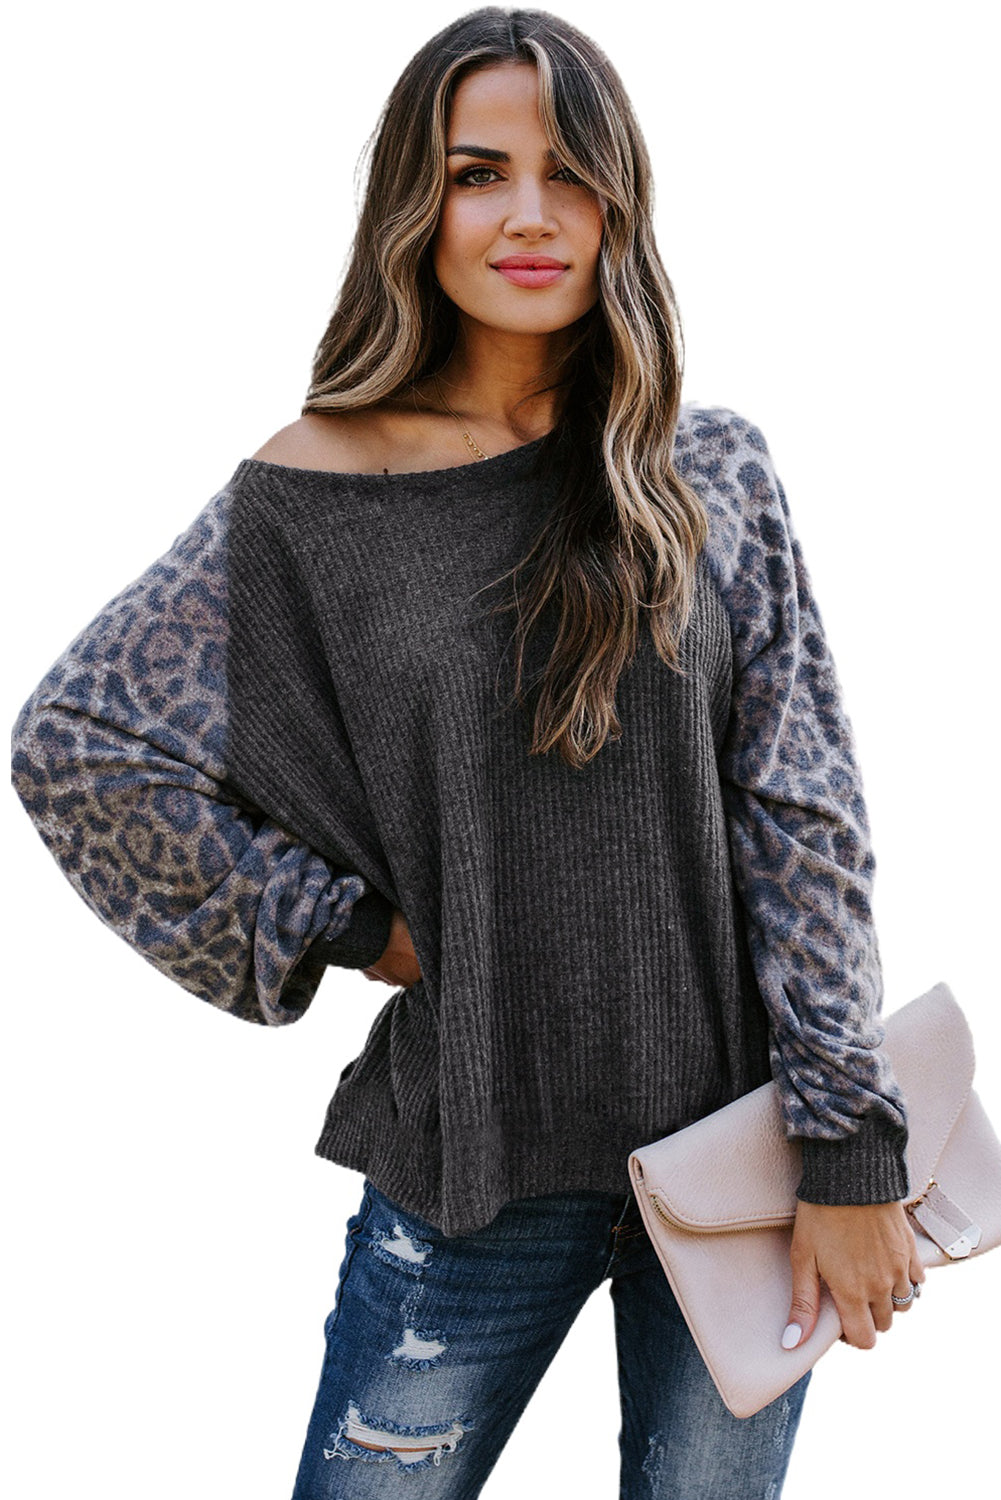 Leopard Patch Ribbed Loose Long Sleeve Blouse